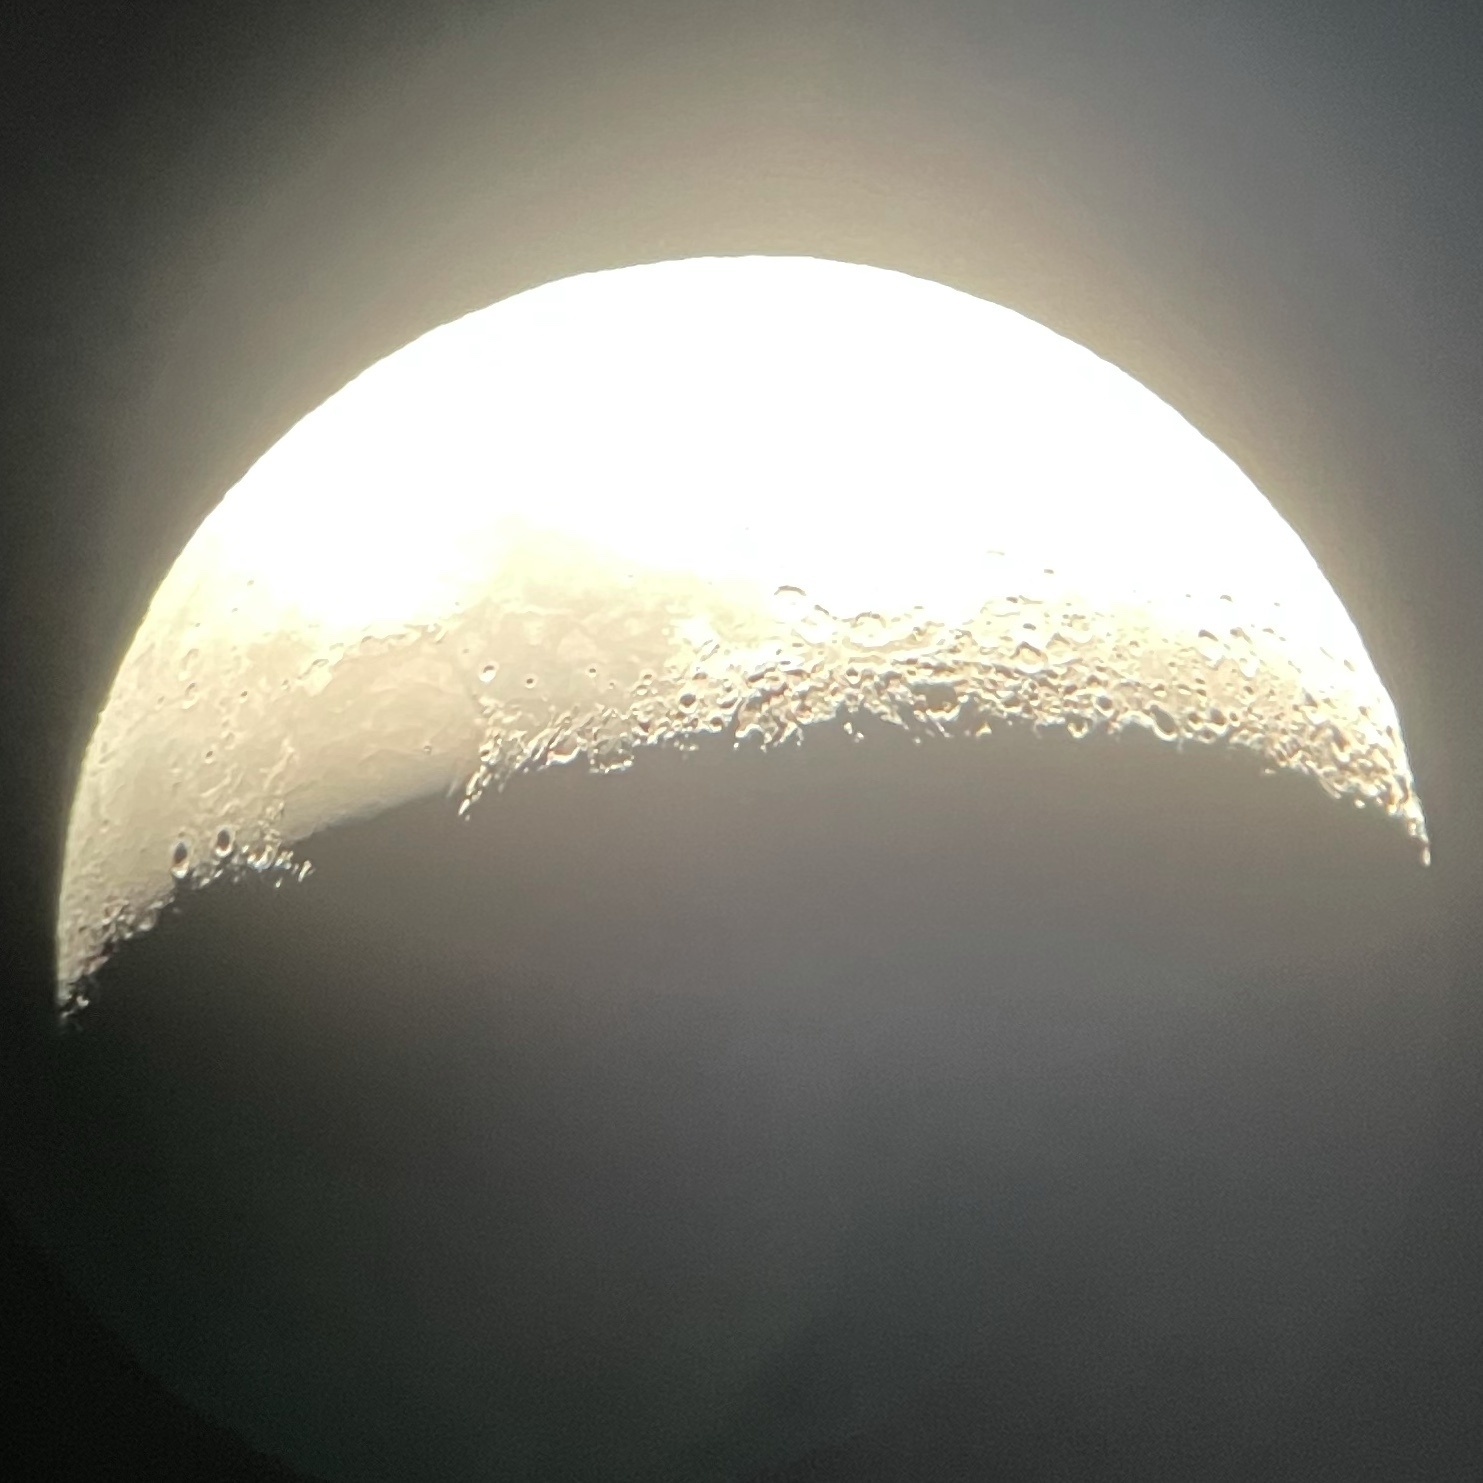 The moon, in epic detail through a telescope. The teleif of the sirface features are stark and the detail in the relief of surface features make it look loke you could run your fingers along the sueface. 